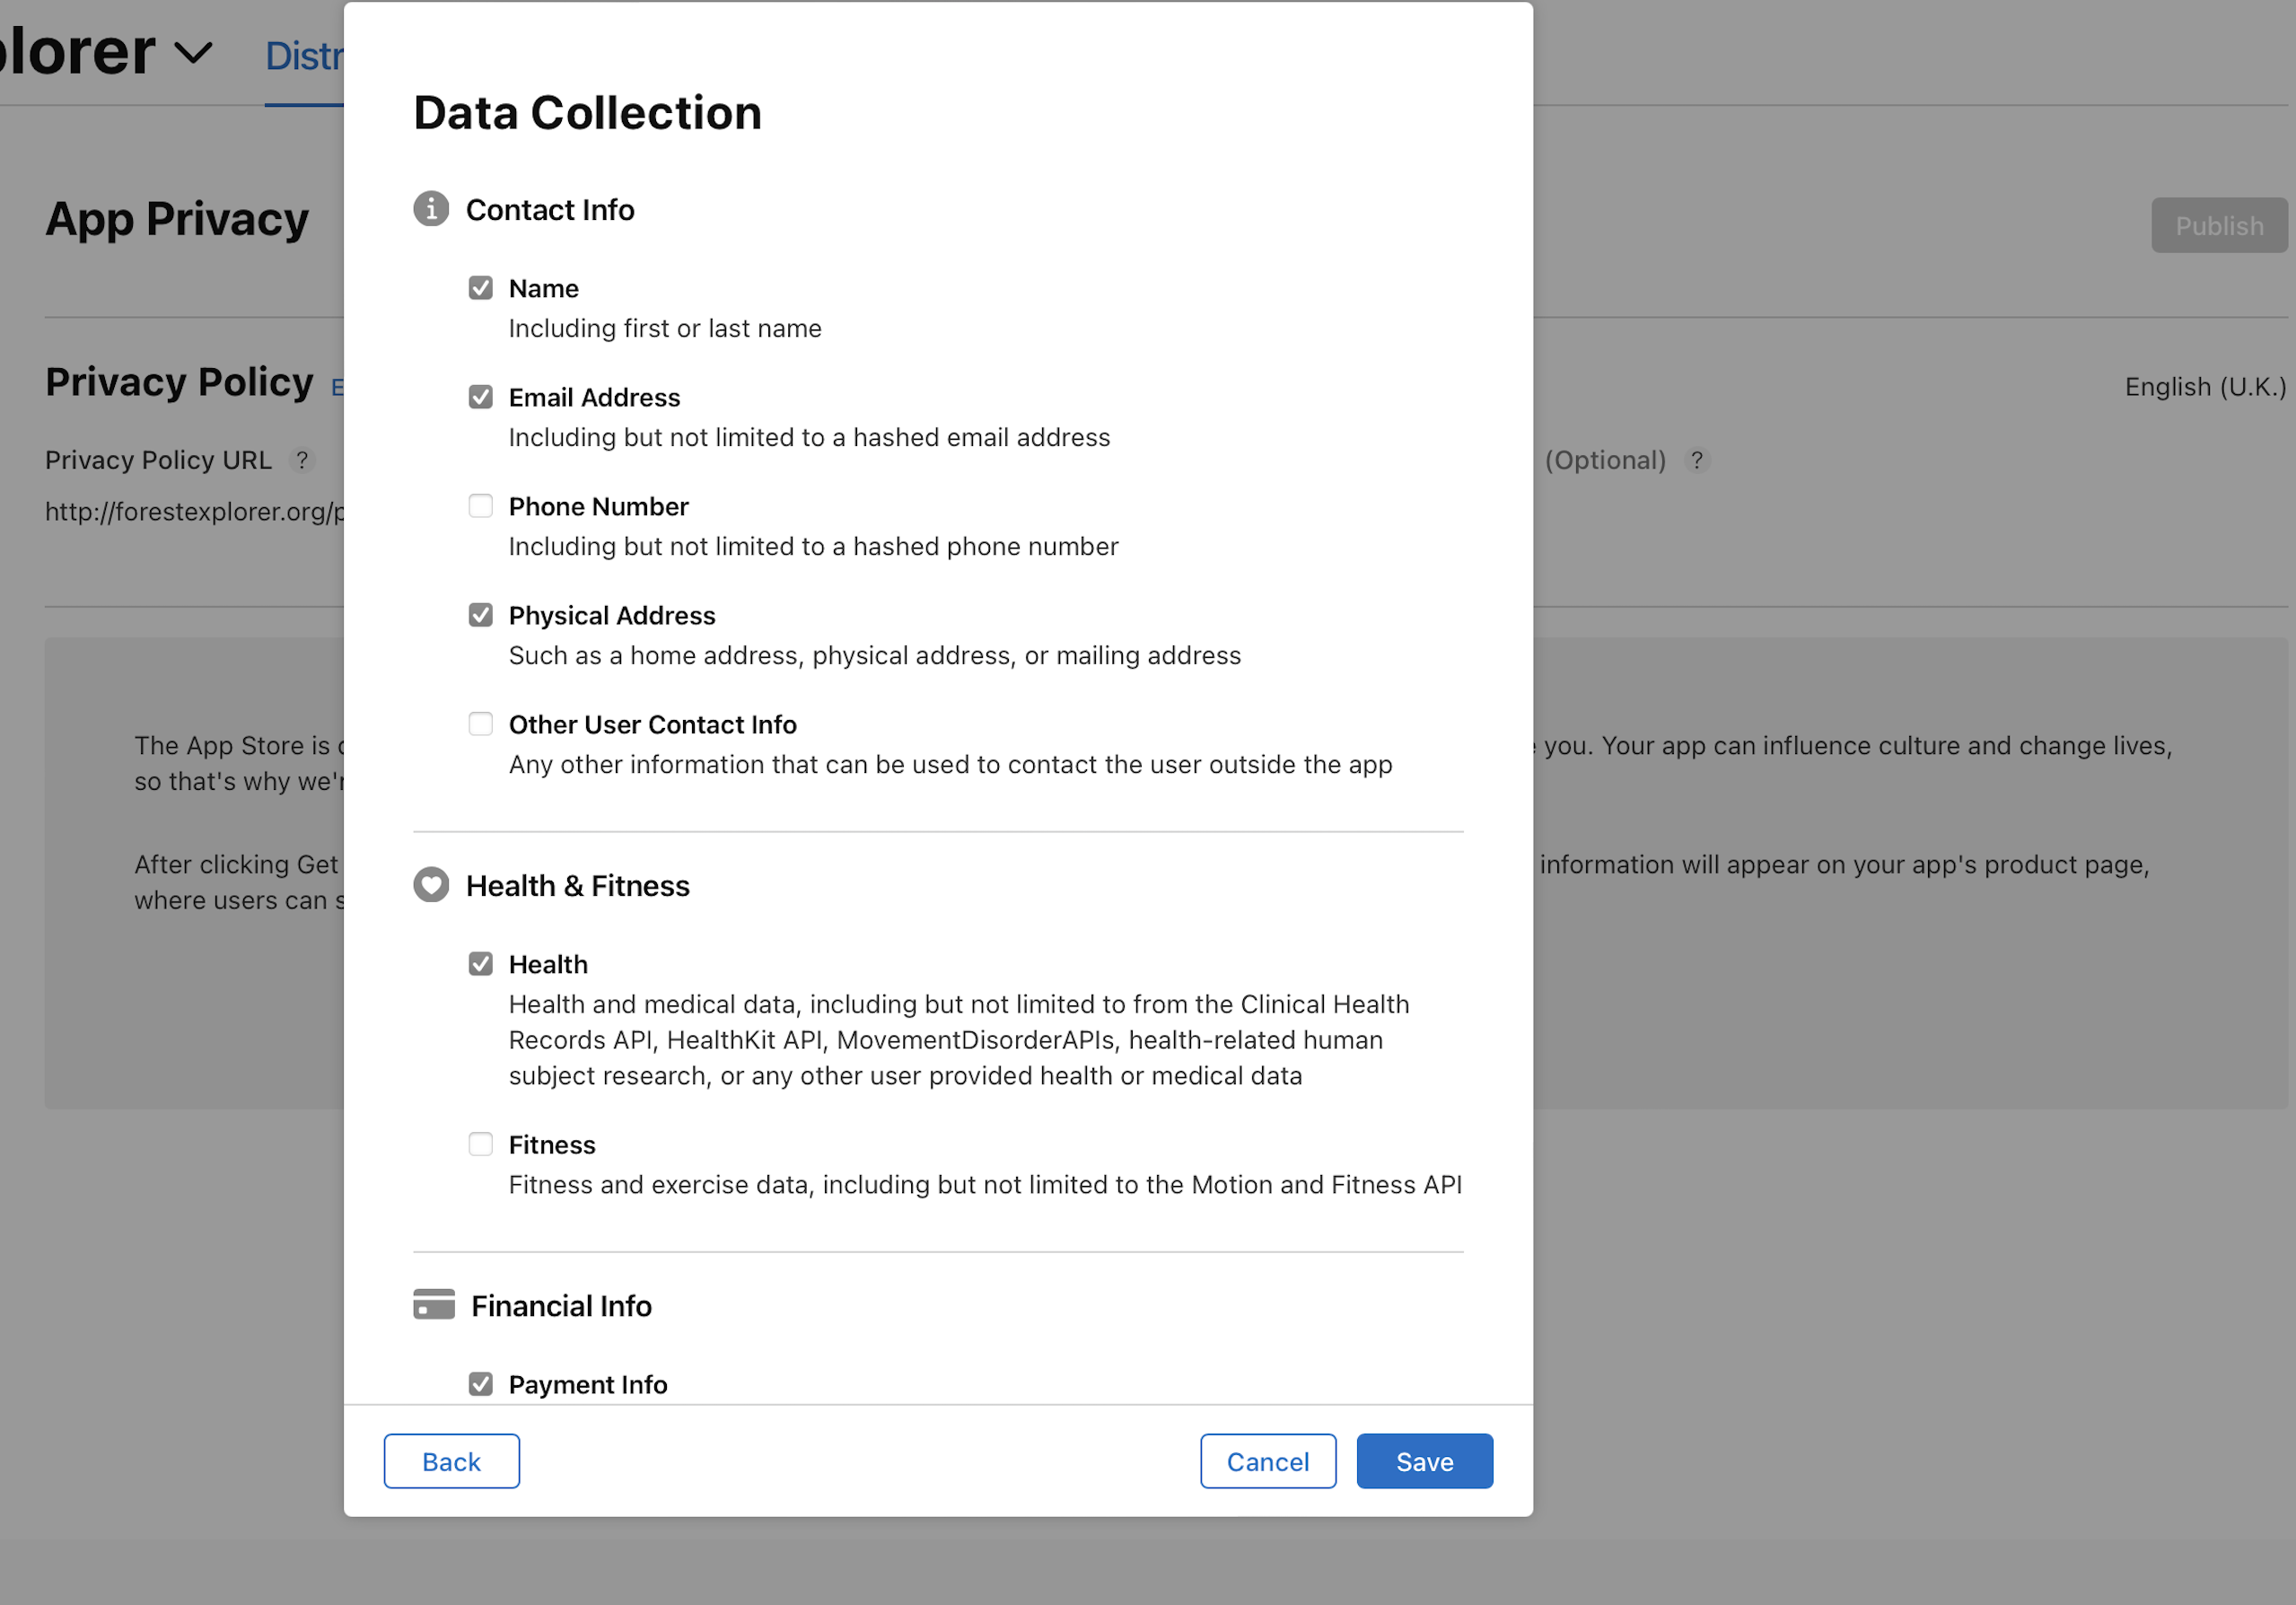 Privacy data collection details